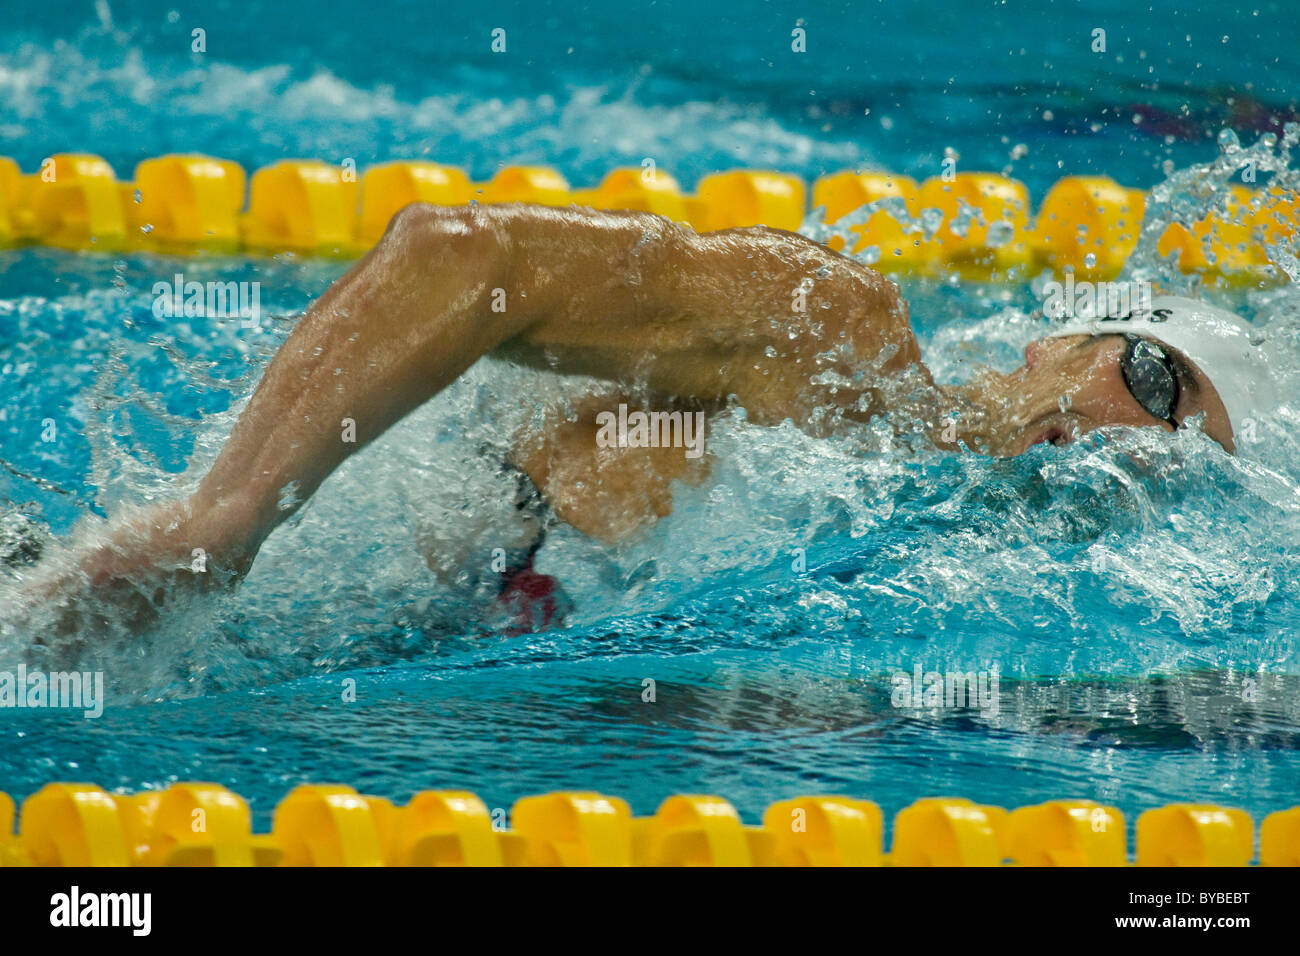 Michael Phelps (USA) competing in the 200 free swimming competition at the 2008 Olympic Summer Games, Beijing, China Stock Photo